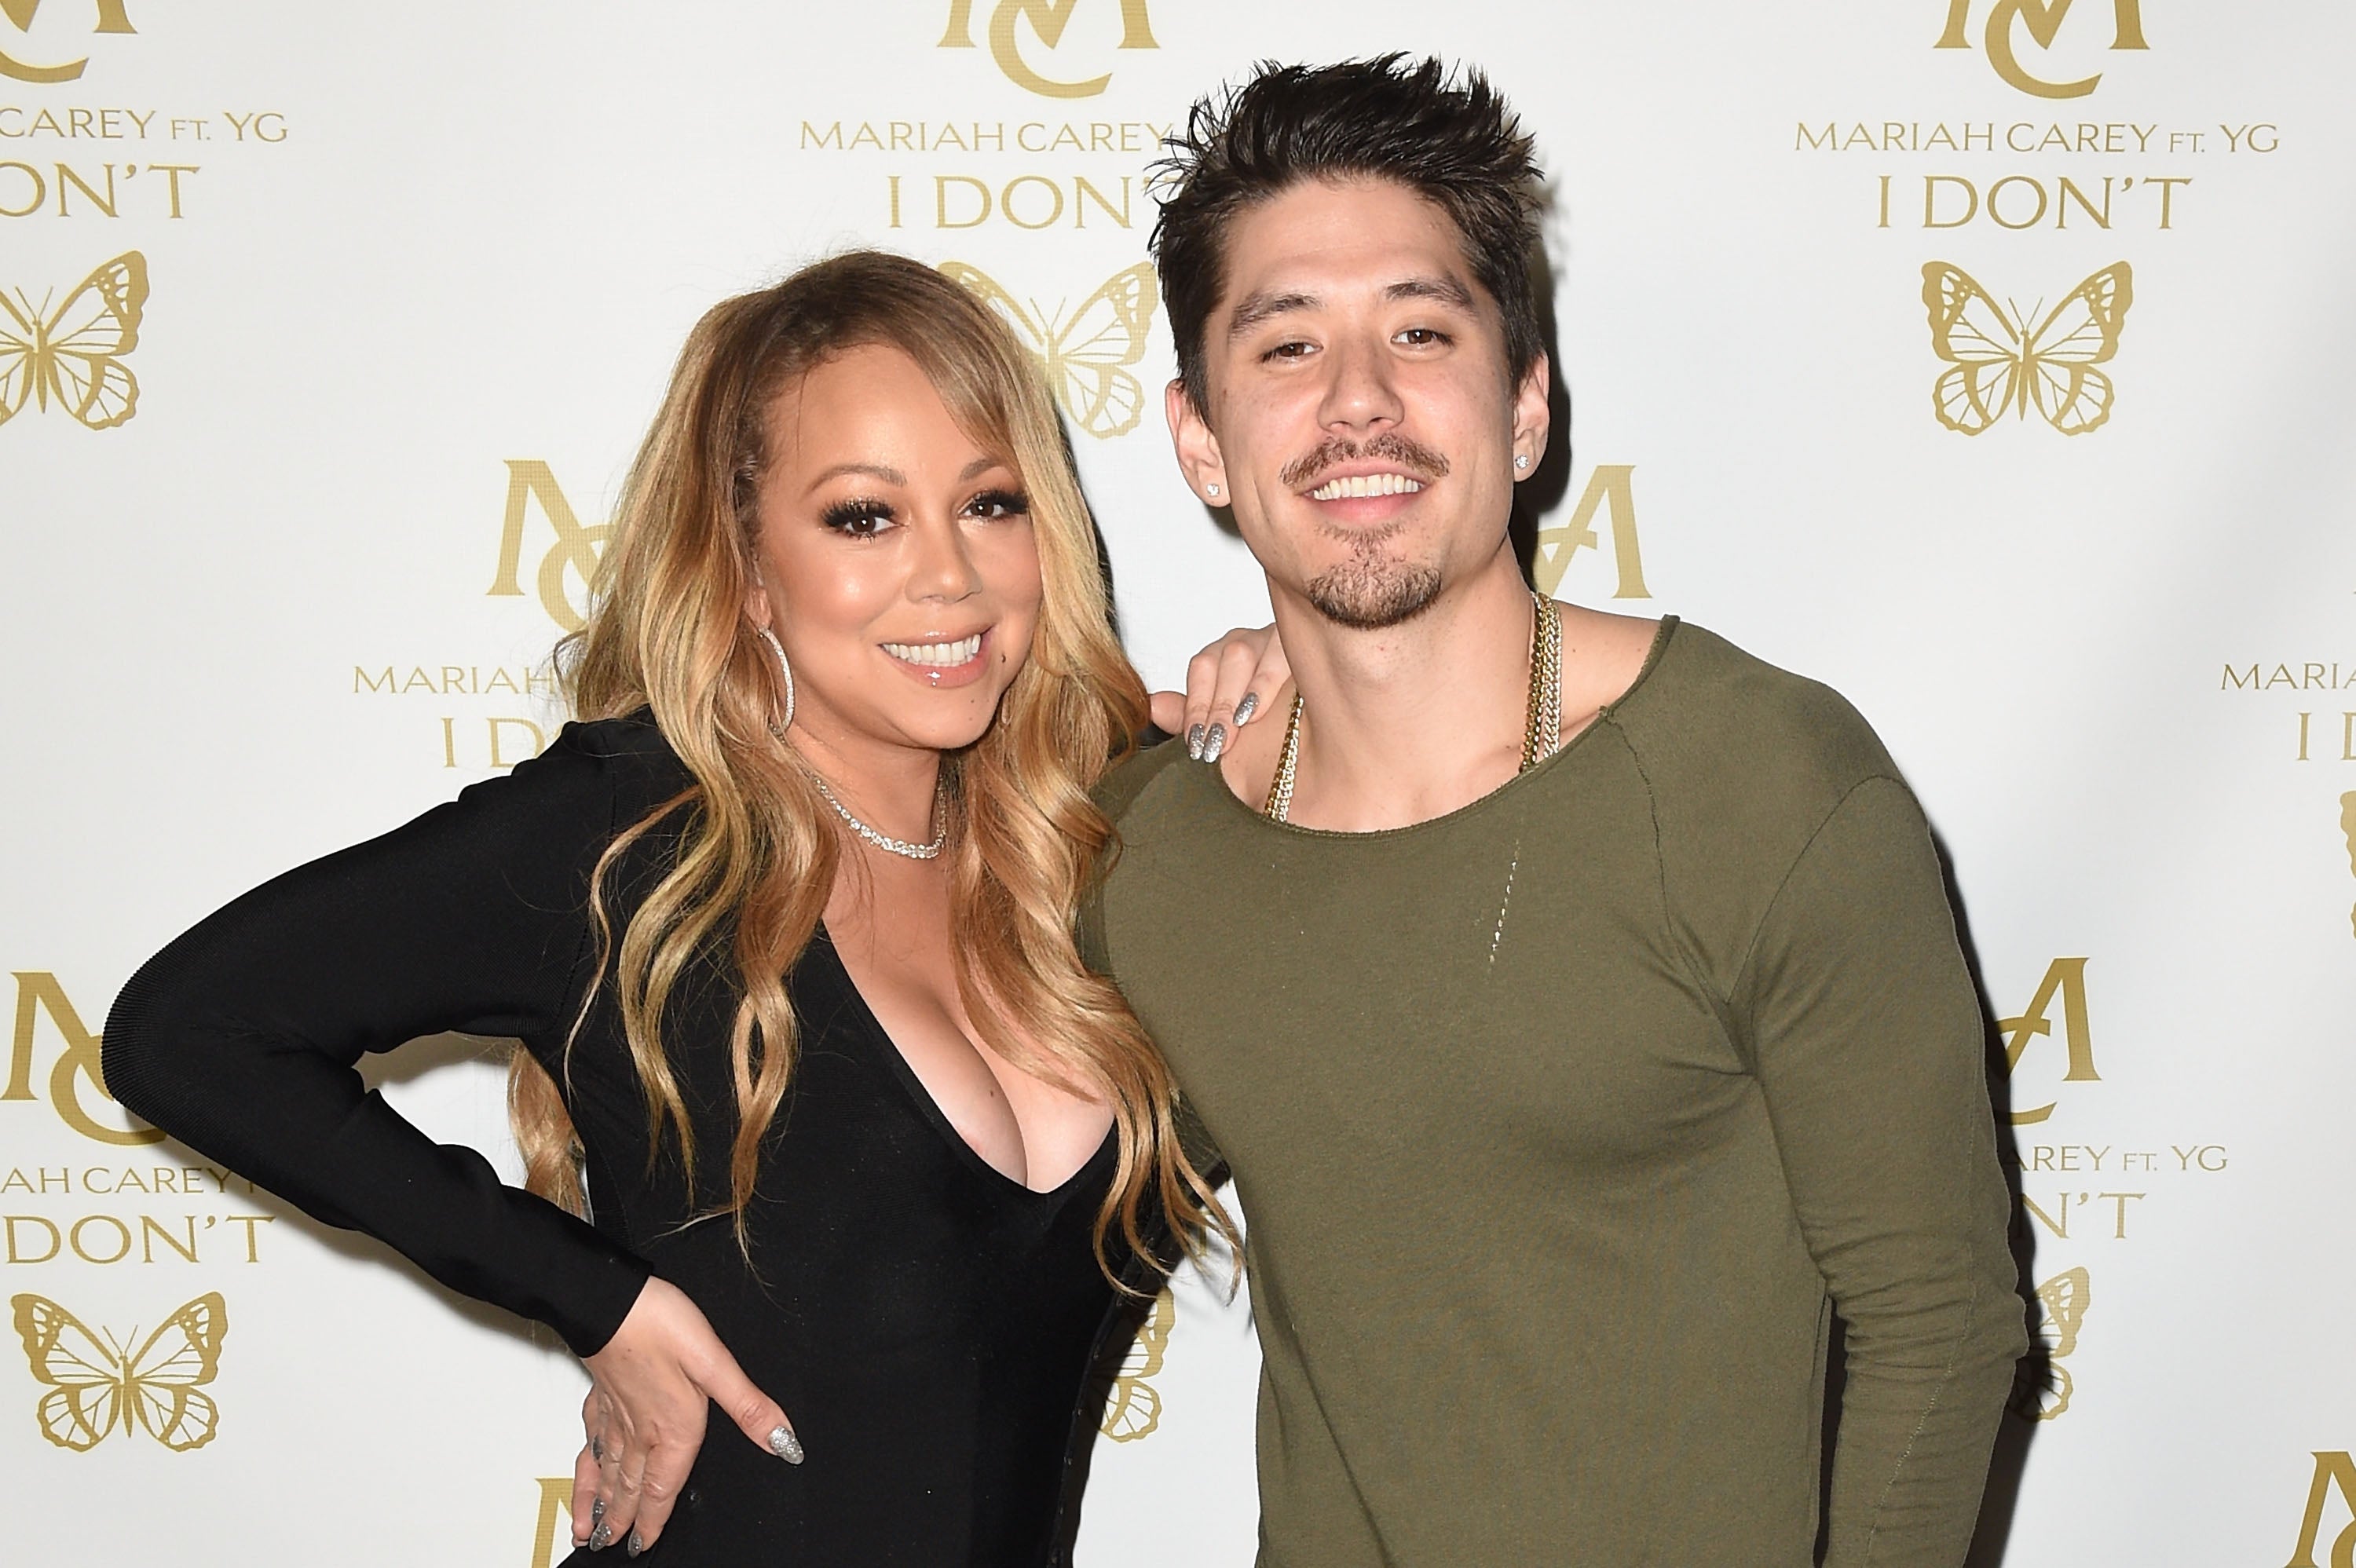 Mariah Carey and Her Dancer Bae’s Dates Nights Are Everything